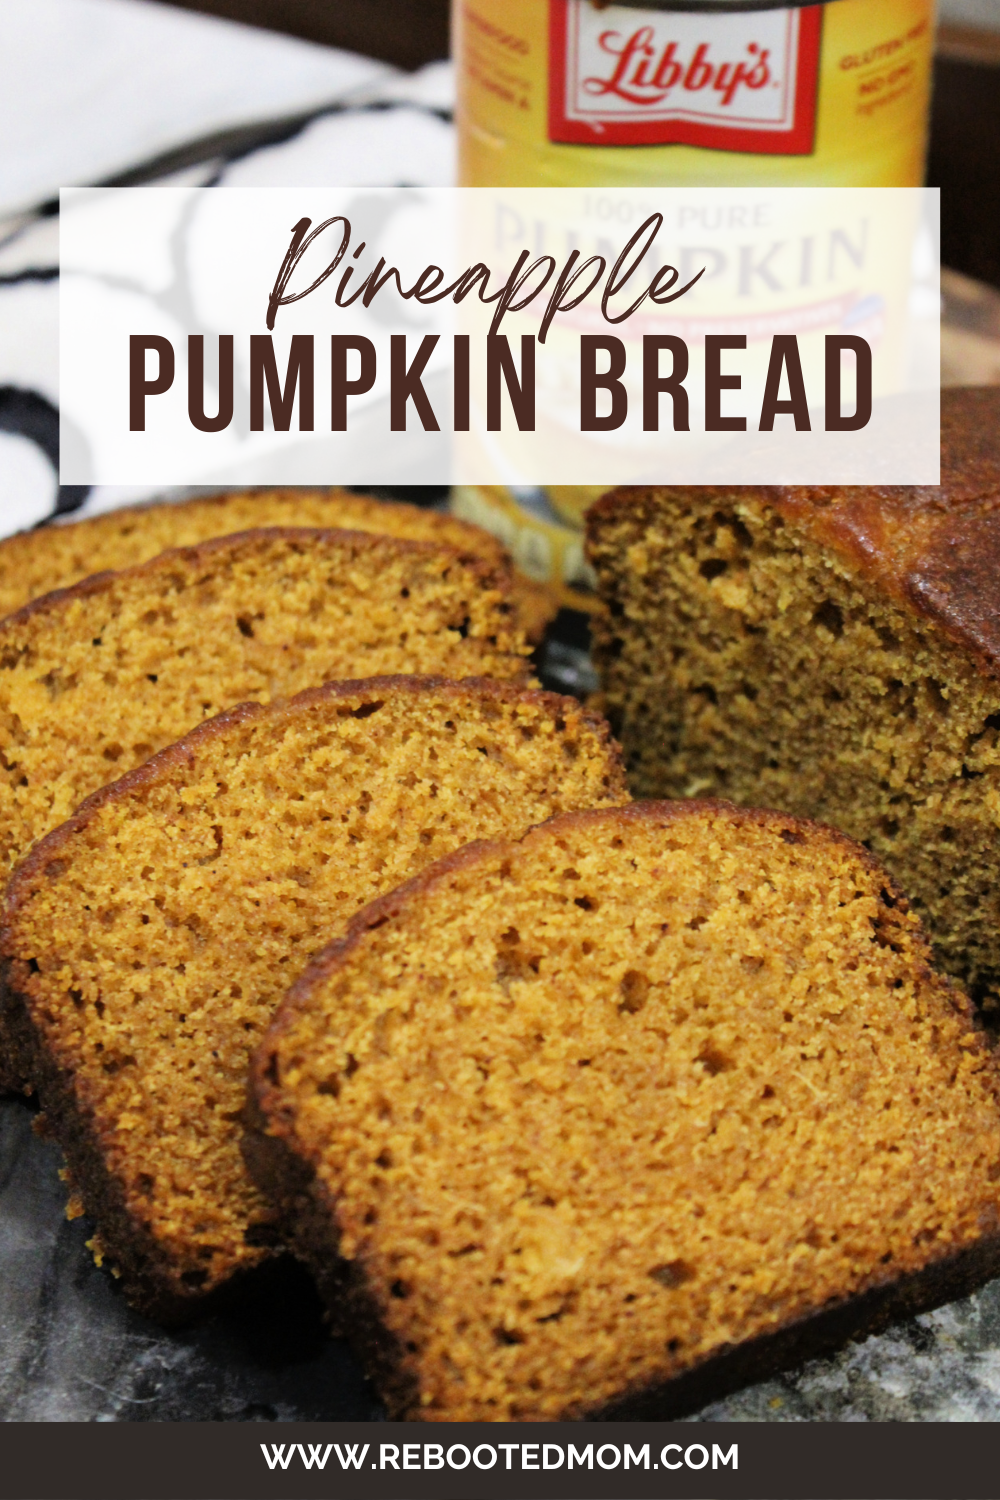 Pineapple Pumpkin Bread brings together flavorful pineapple and canned pumpkin for a super moist, rich, decadent loaf that is super easy to make and even better enjoyed!